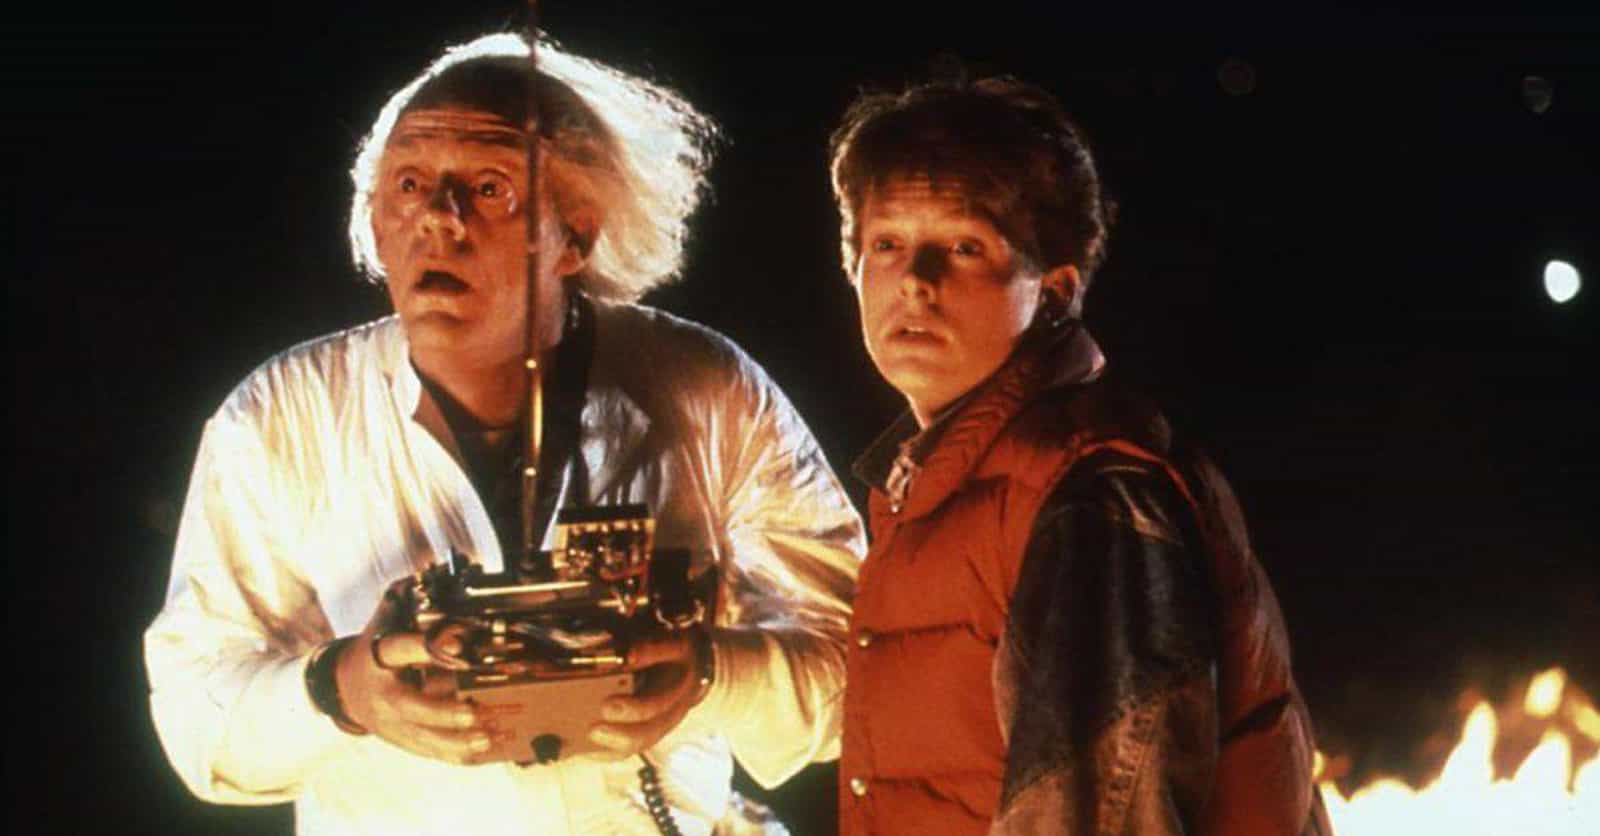 Small Details From The 'Back To The Future' Trilogy That Fans Uncovered